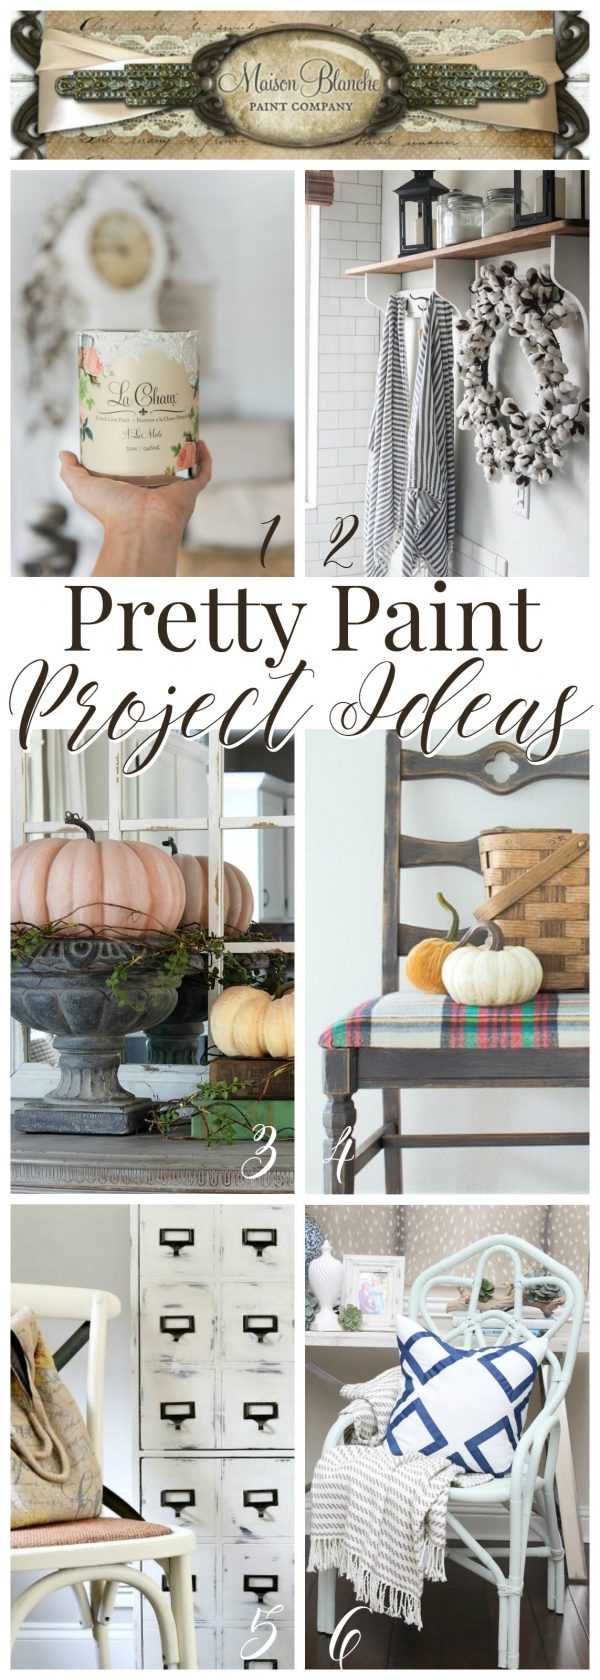 Get these simple and easy steps for this gorgeous chalk furniture paint tutorial from A Blissful Nest. An amazing transformation on a flea market piece! https://ablissfulnest.com/ #chalkpaint #chalkfurniturepaint